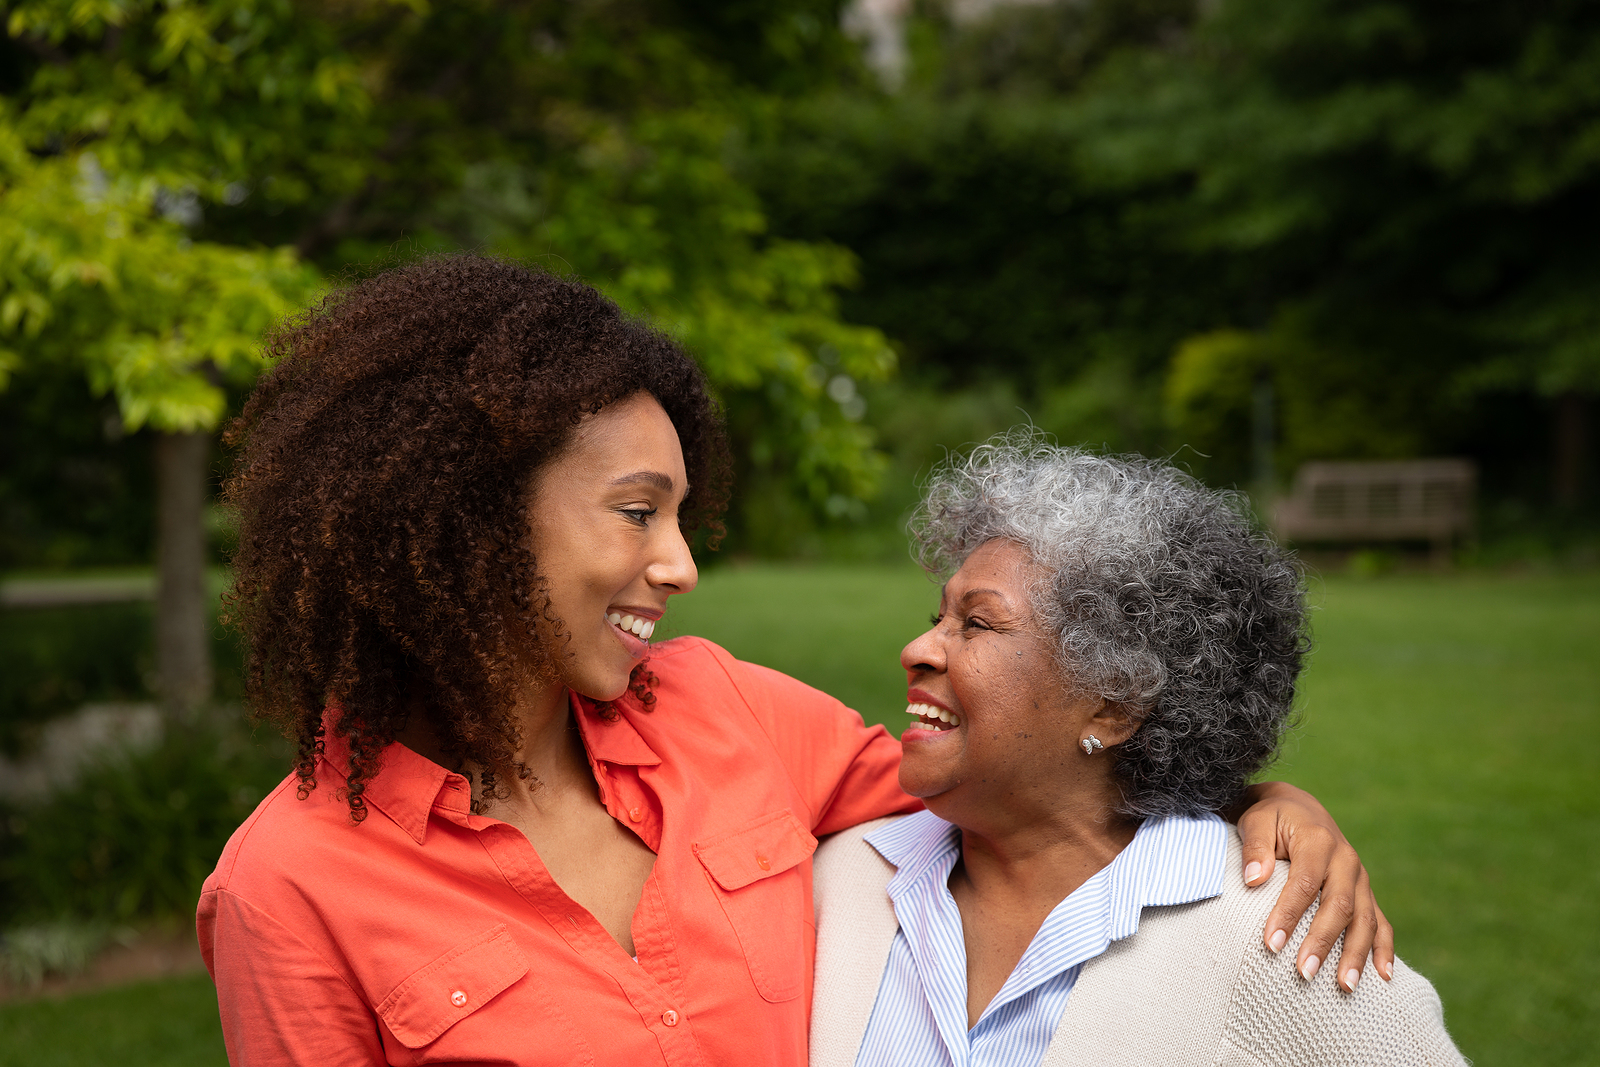 How Can Family Caregivers Understand the Emotional Needs of Seniors?